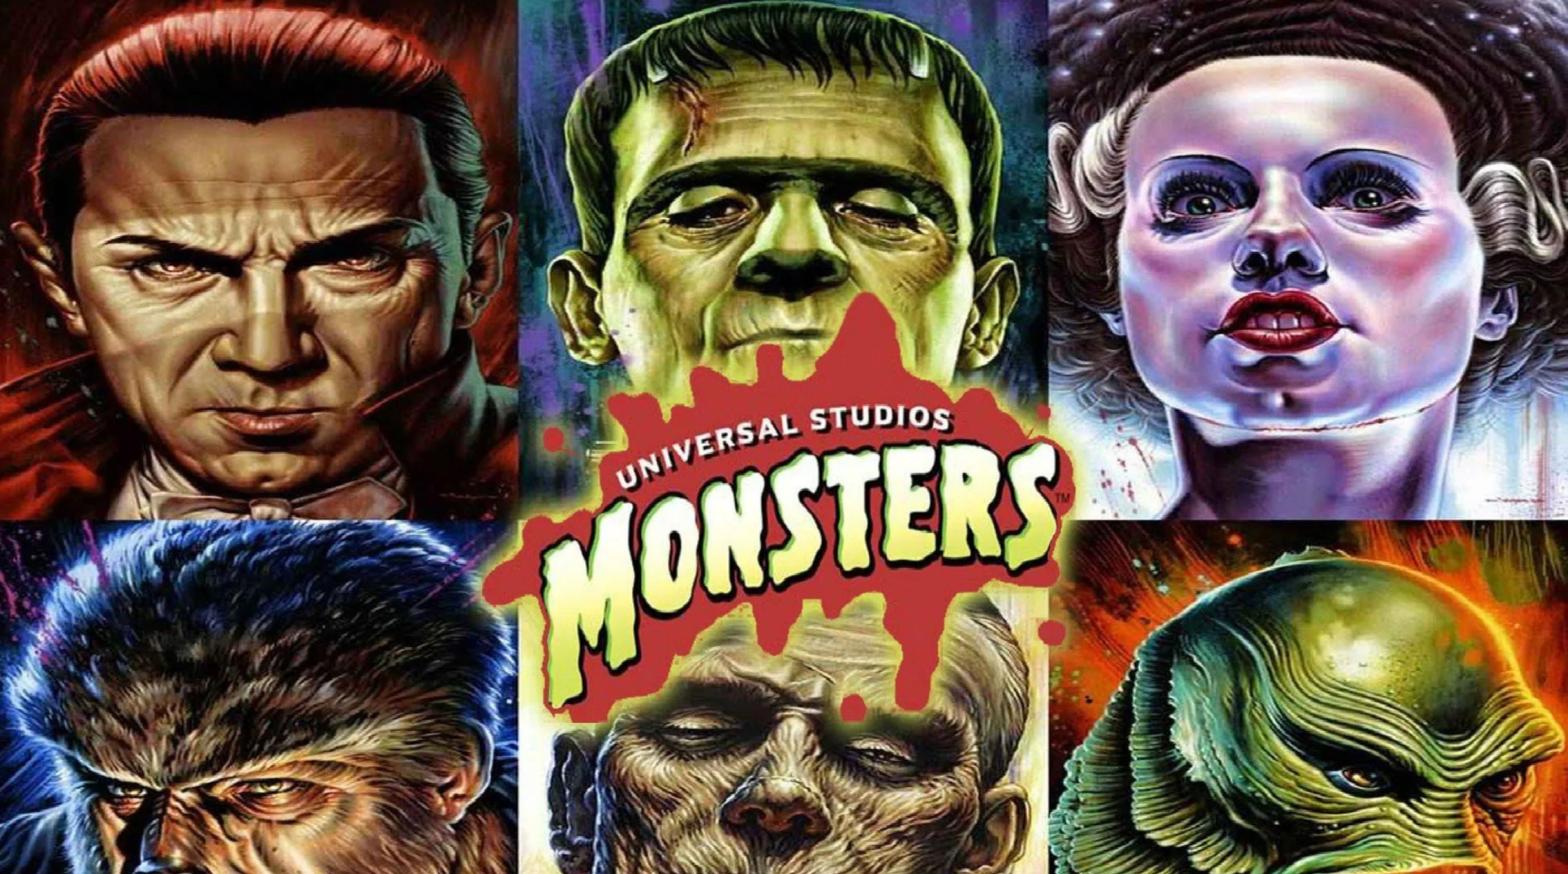 Artwork of the classic Universal Monsters by Jason Edmiston (Image: Universal/Jason Edmiston)